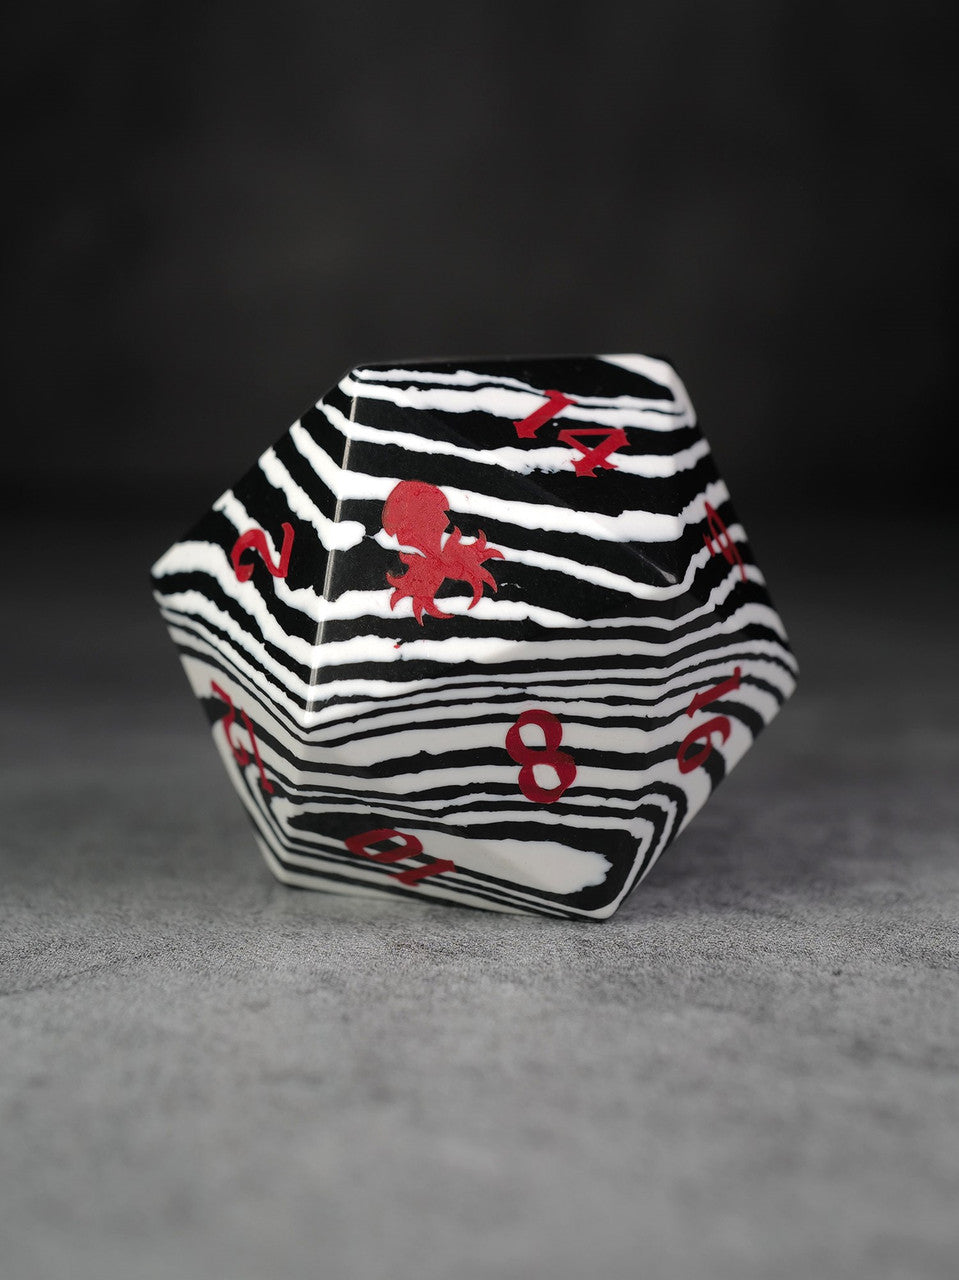 40mm White and Black Semi-Precious Single D20 with Red Ink